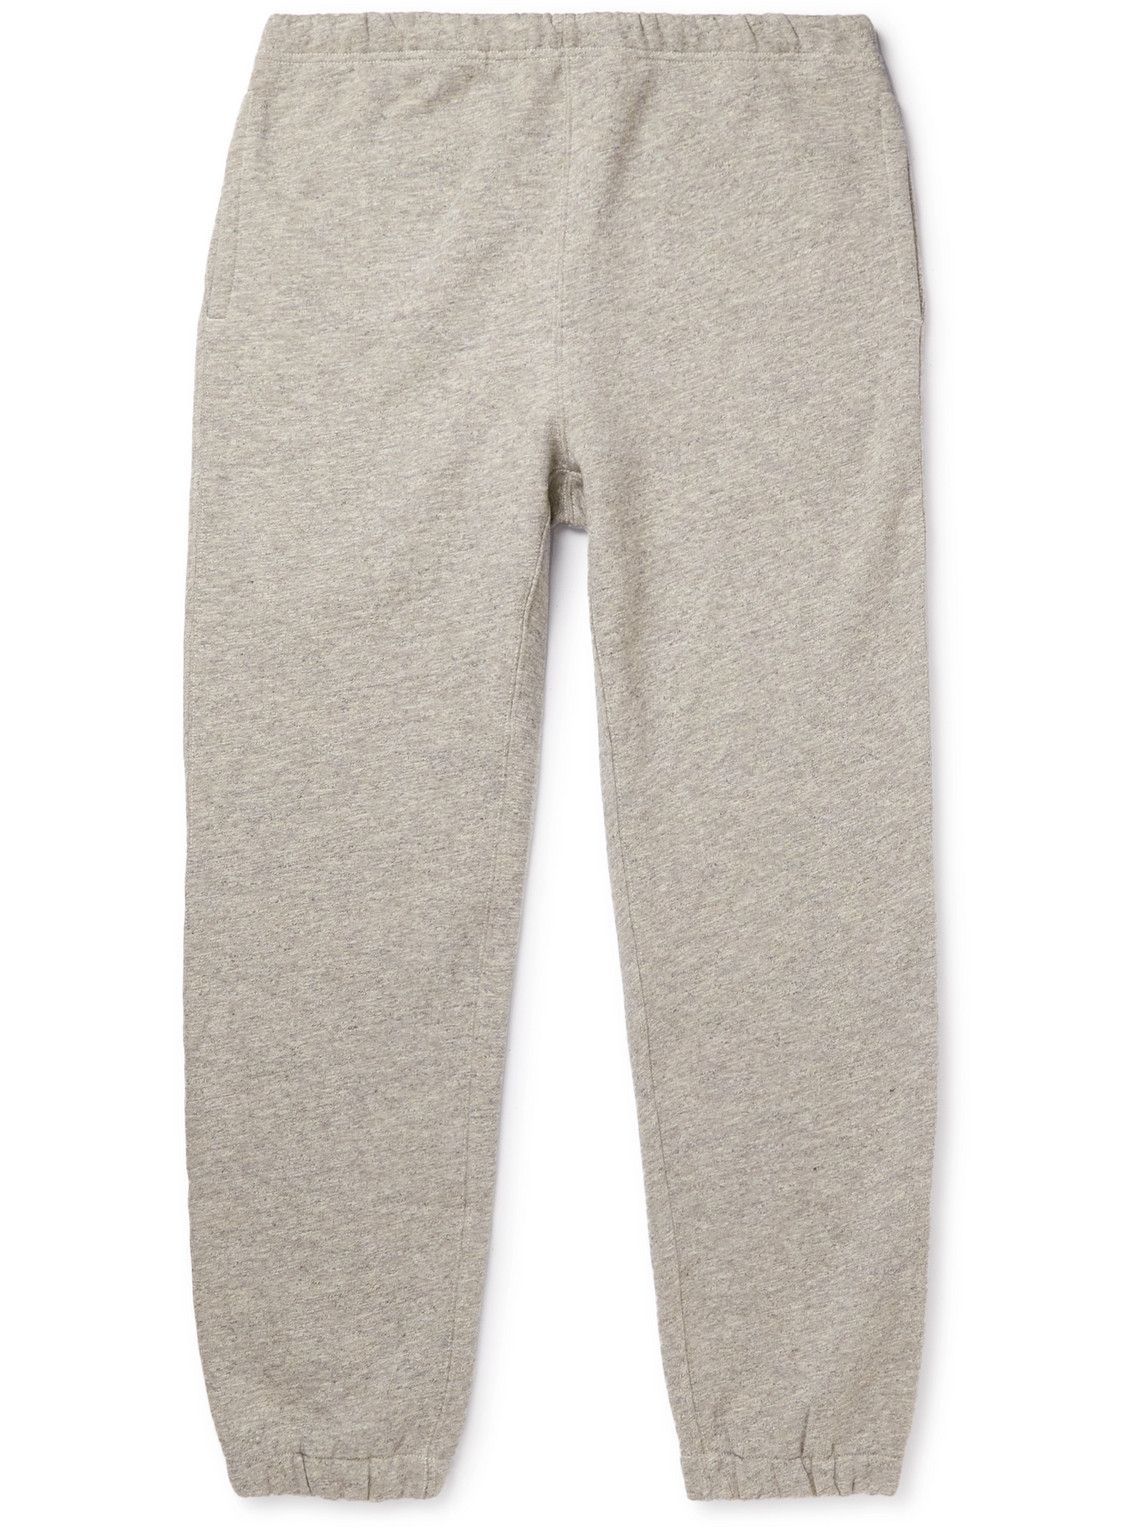 Photo: Polo Ralph Lauren - Chariots of Fire Tapered Cotton-Blend Jersey Sweatpants - Gray